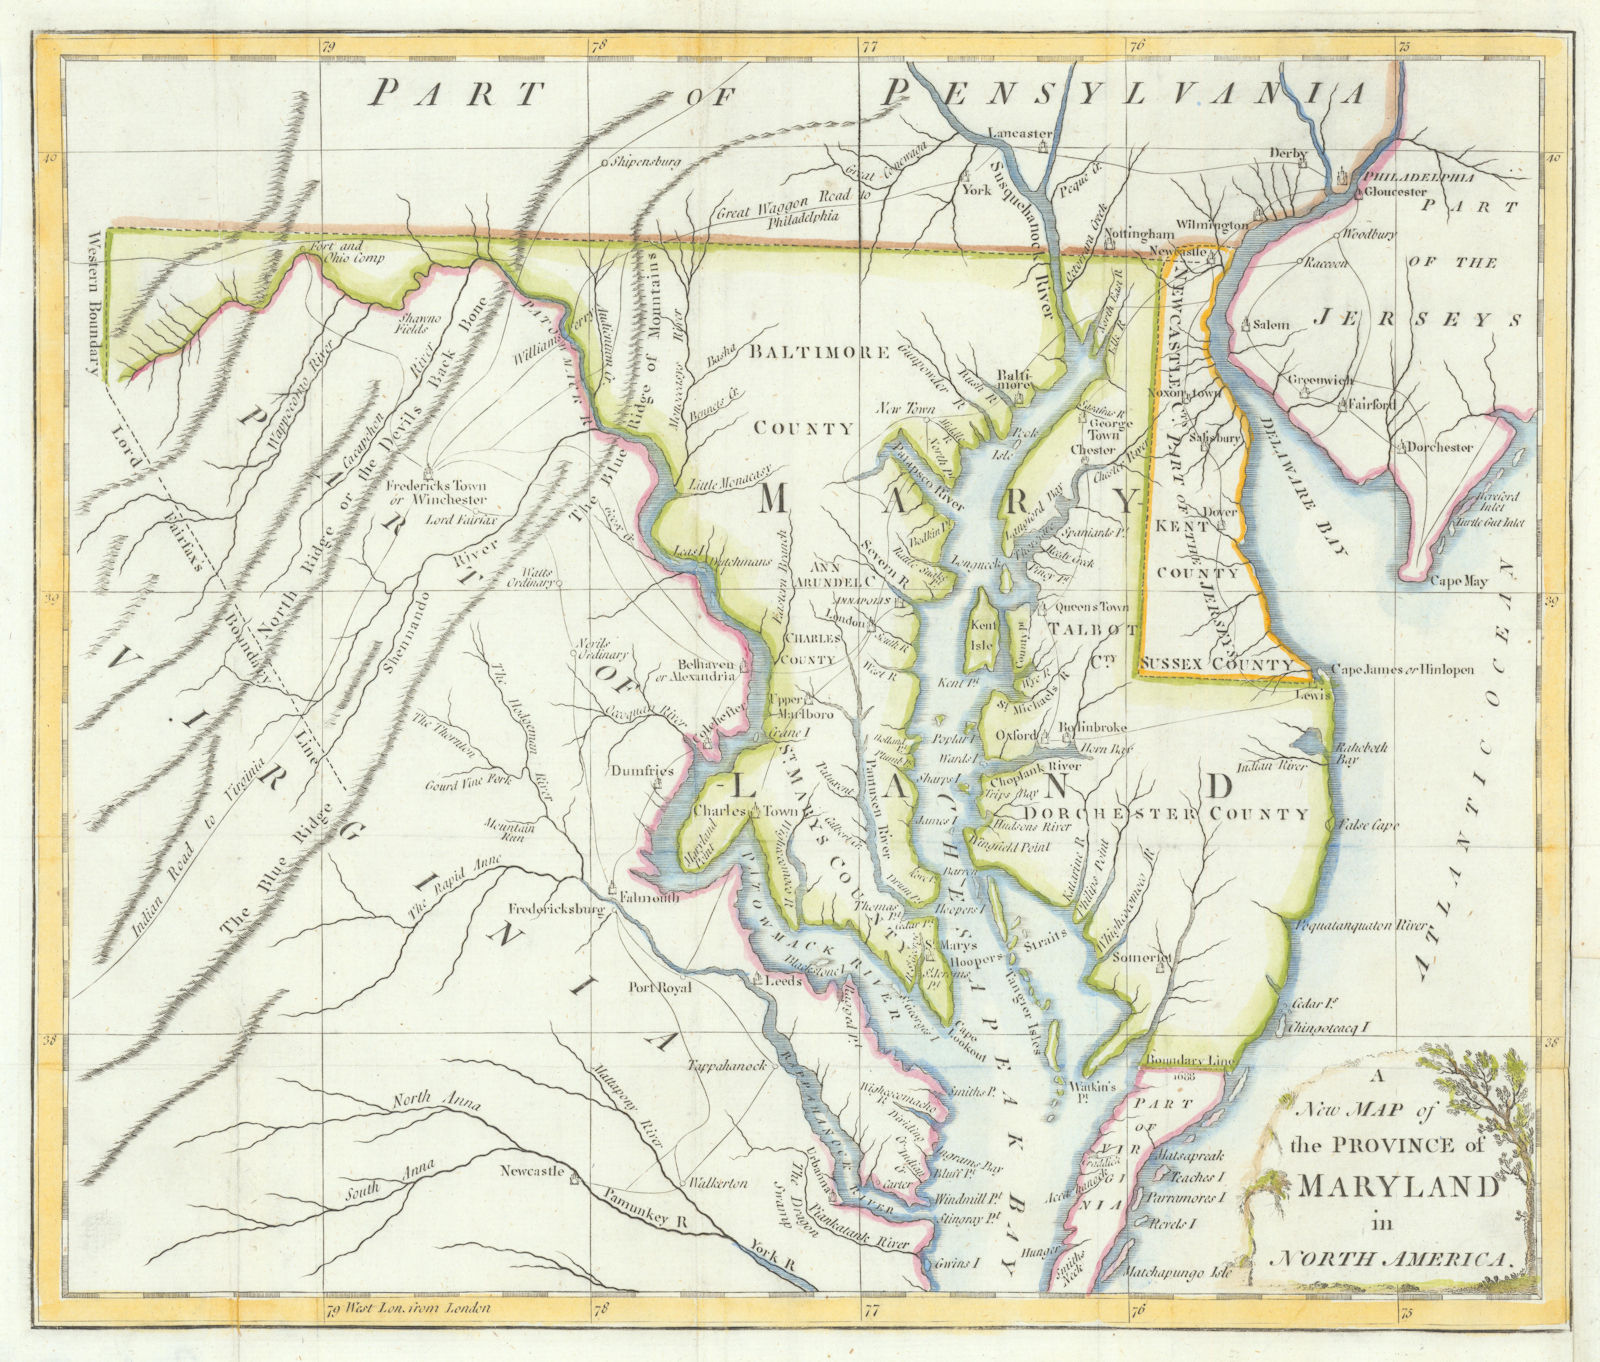 A New Map of the Province of Maryland in North America… Universal Magazine 1780